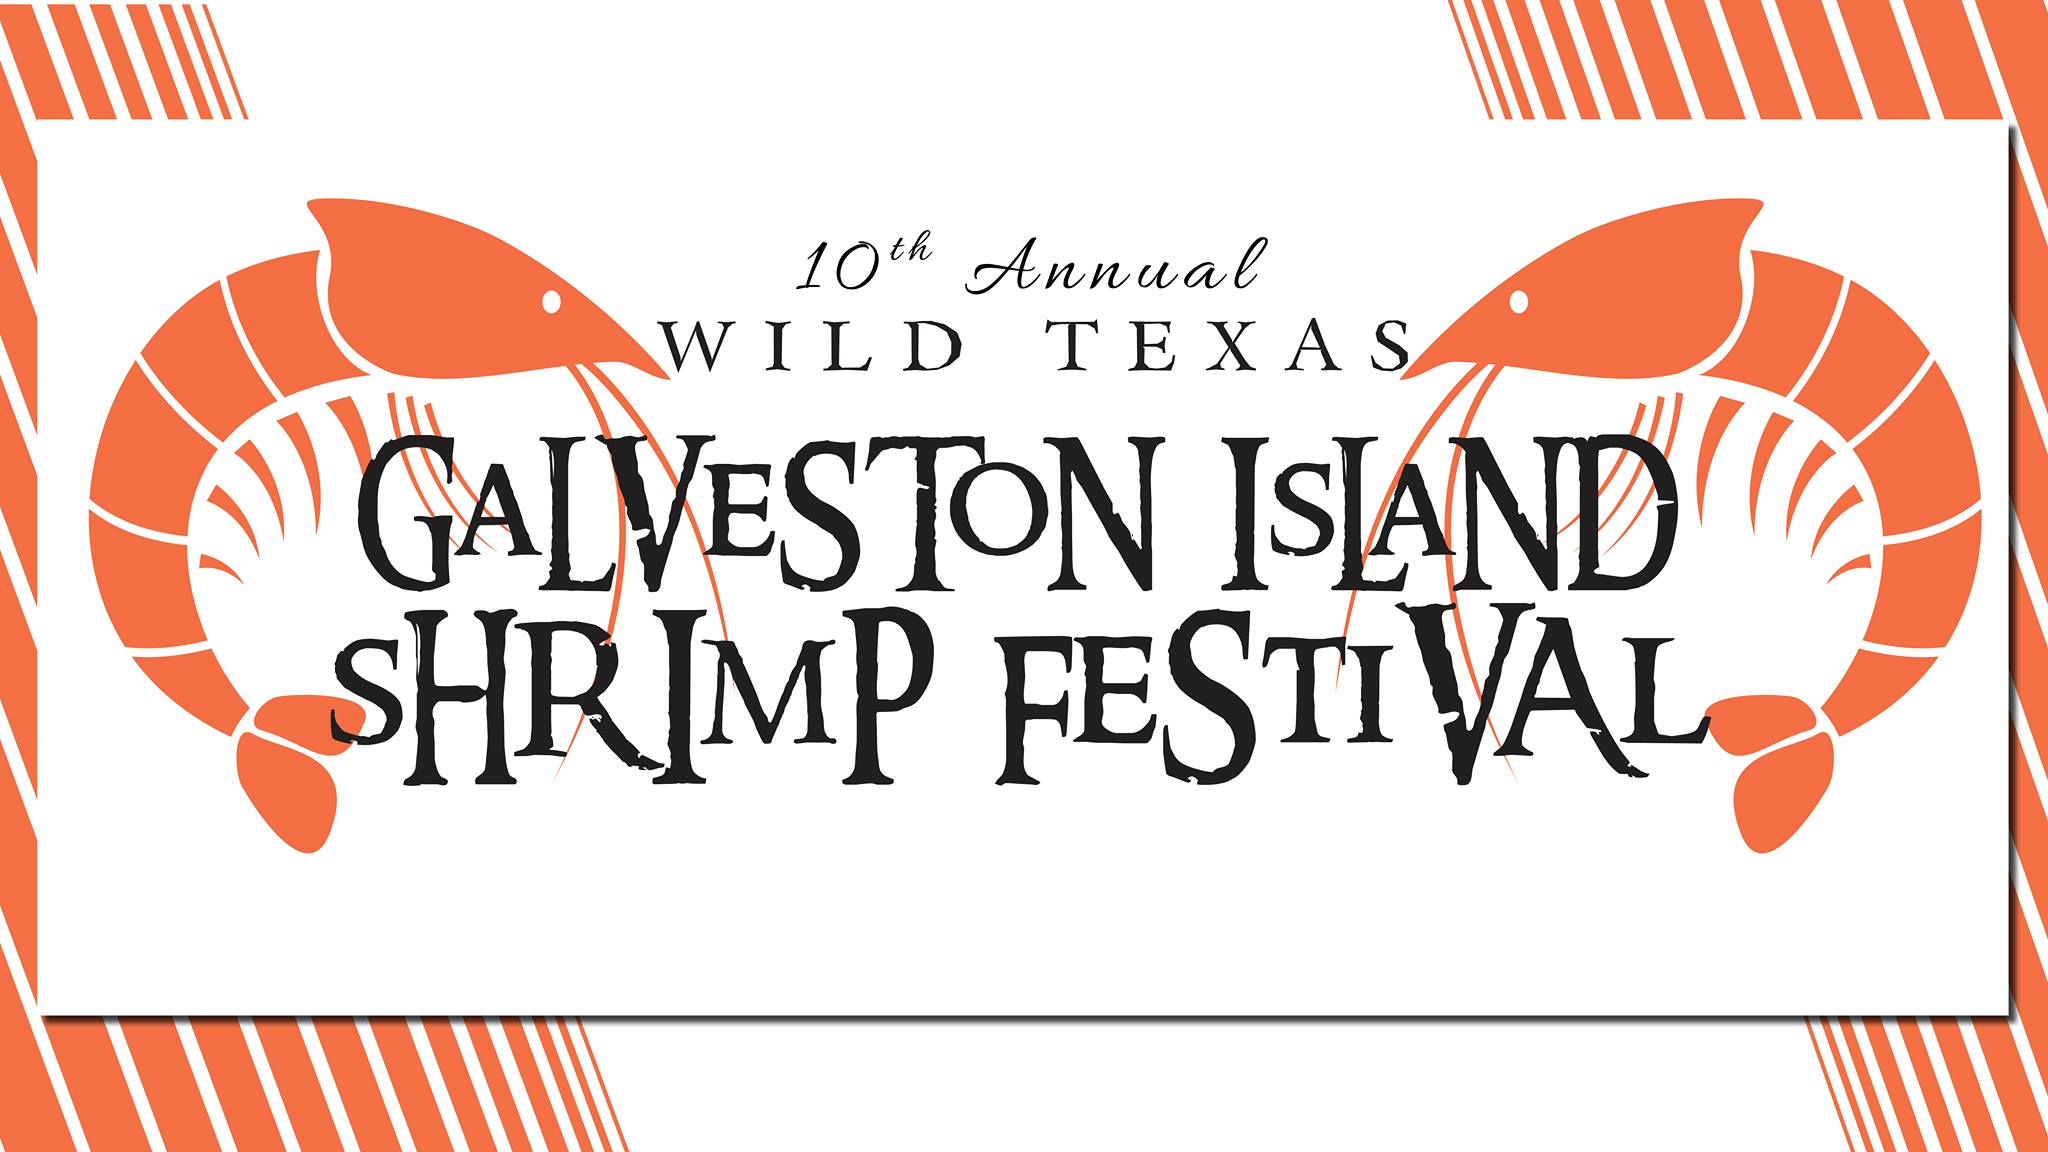 You are currently viewing Galveston Island Shrimp Festival